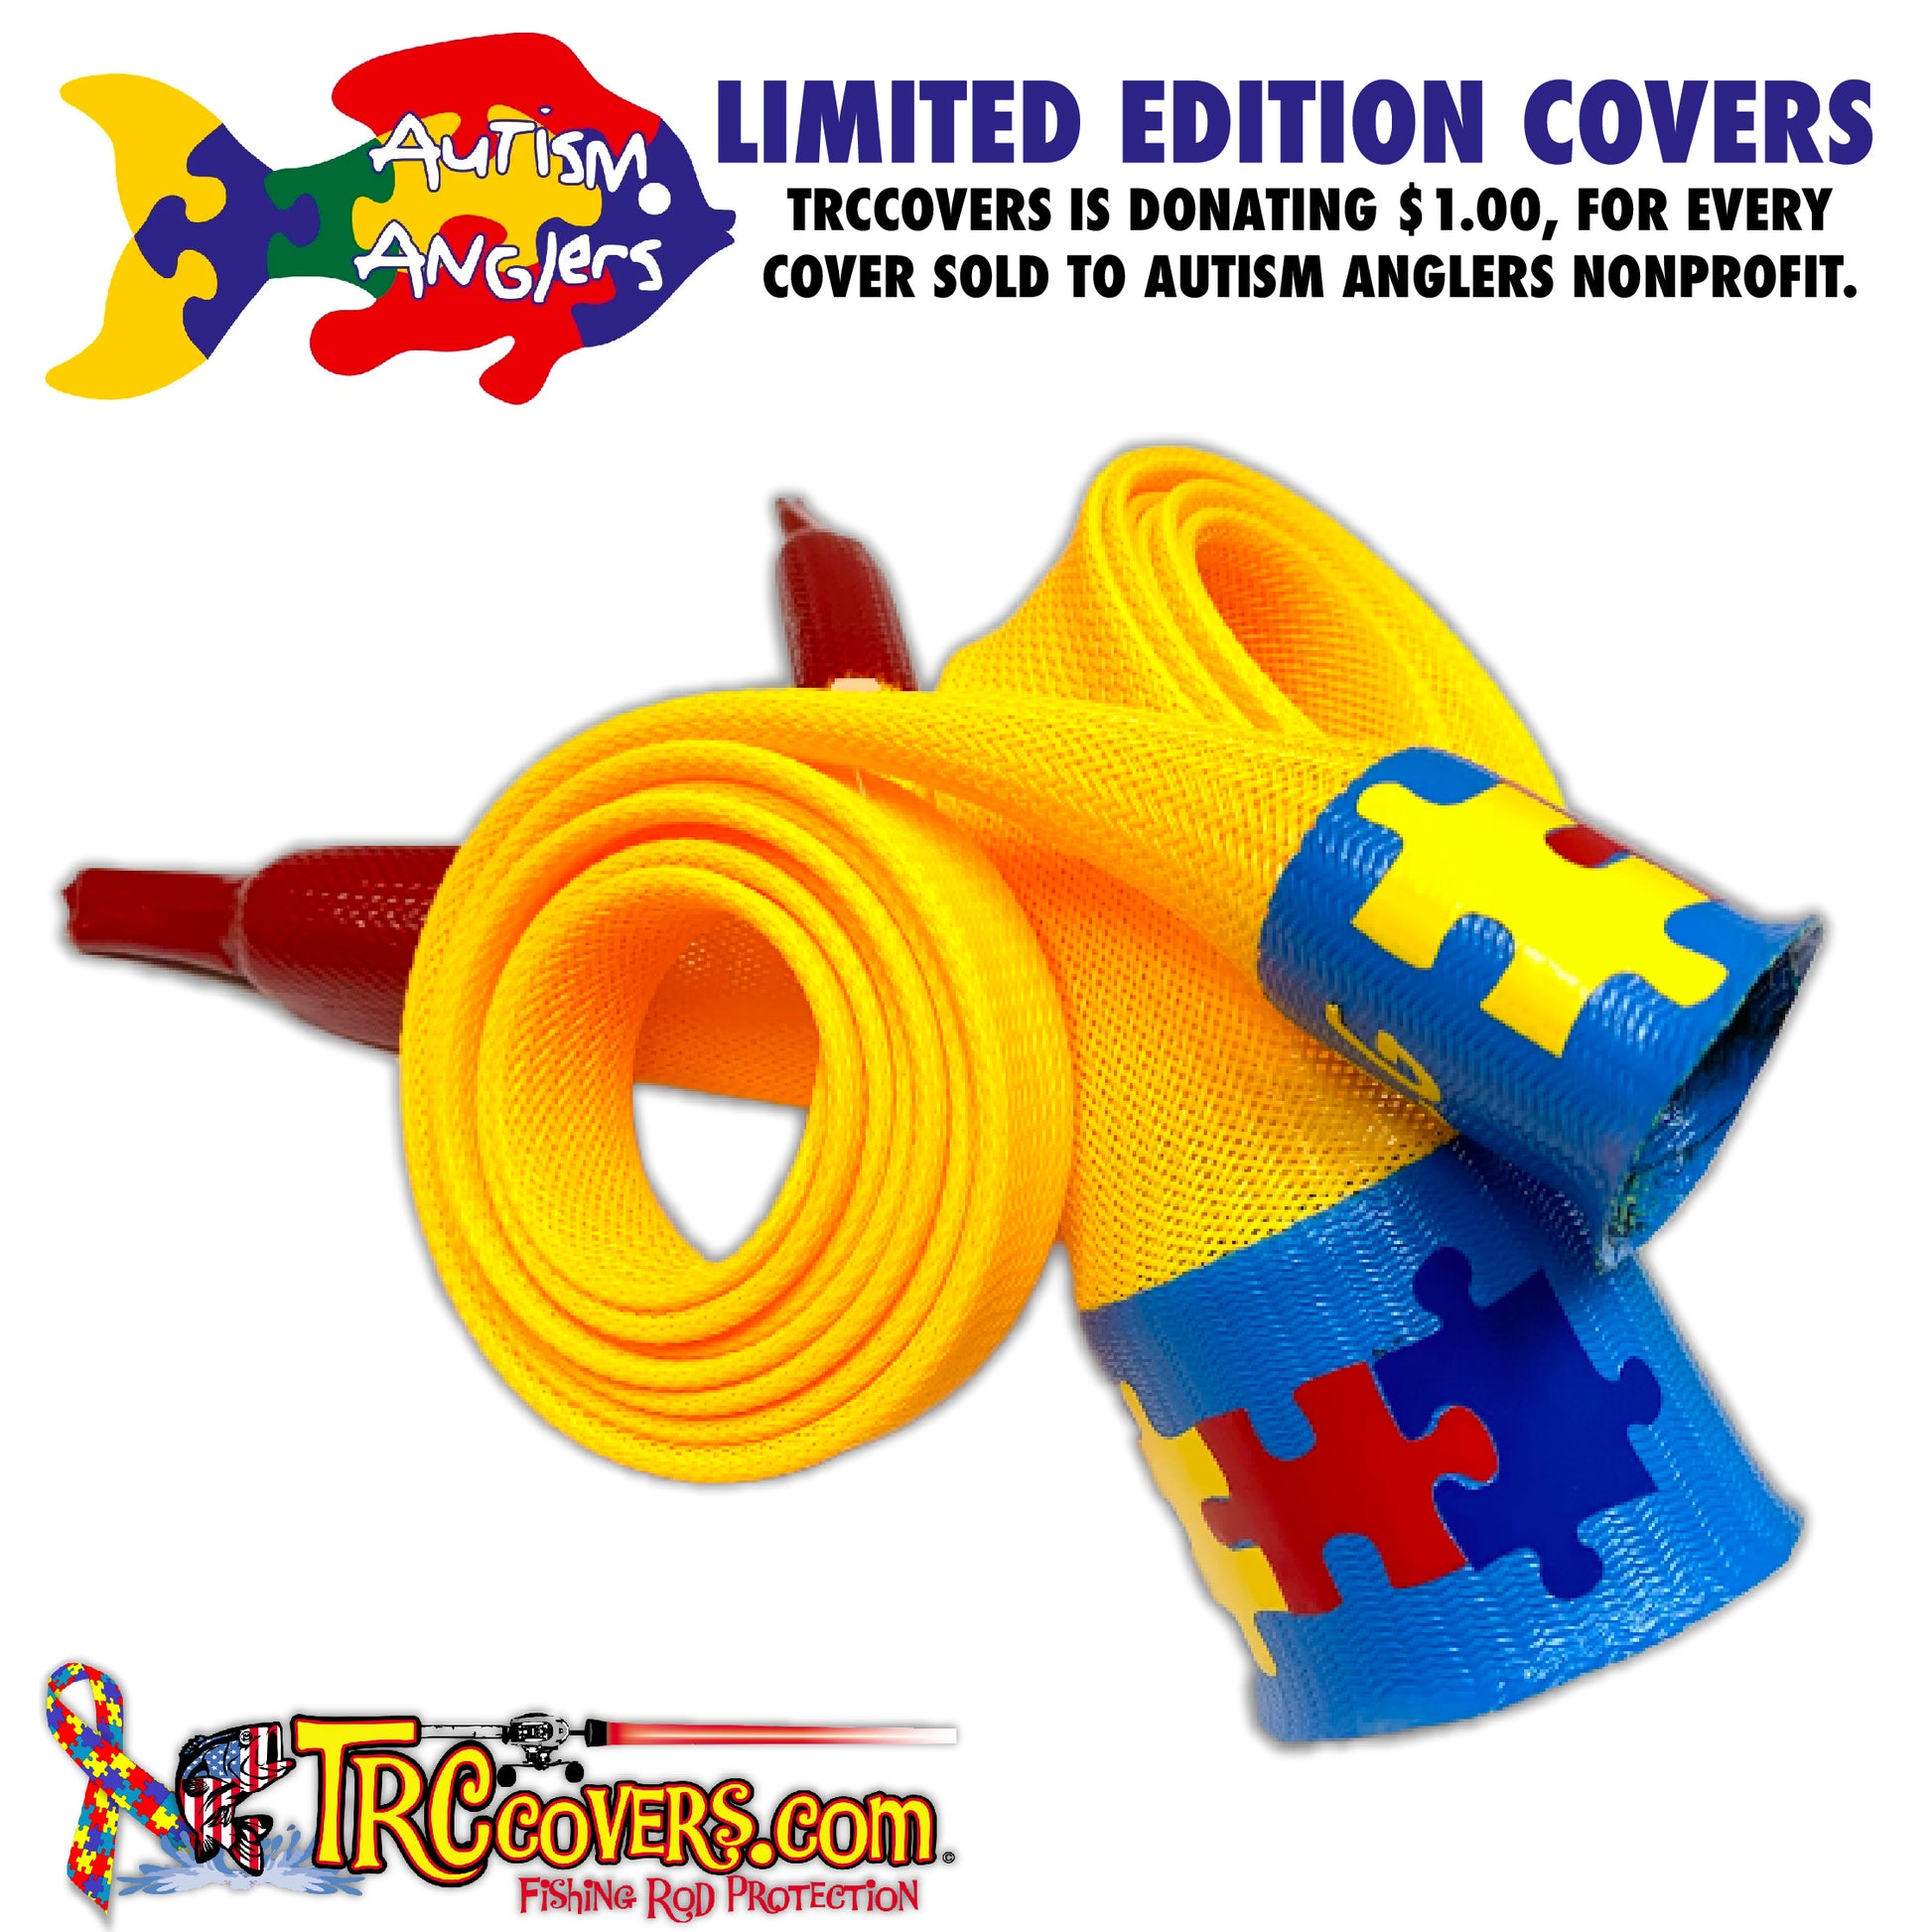 Autism Awareness Limited Edition Covers – TRCcovers